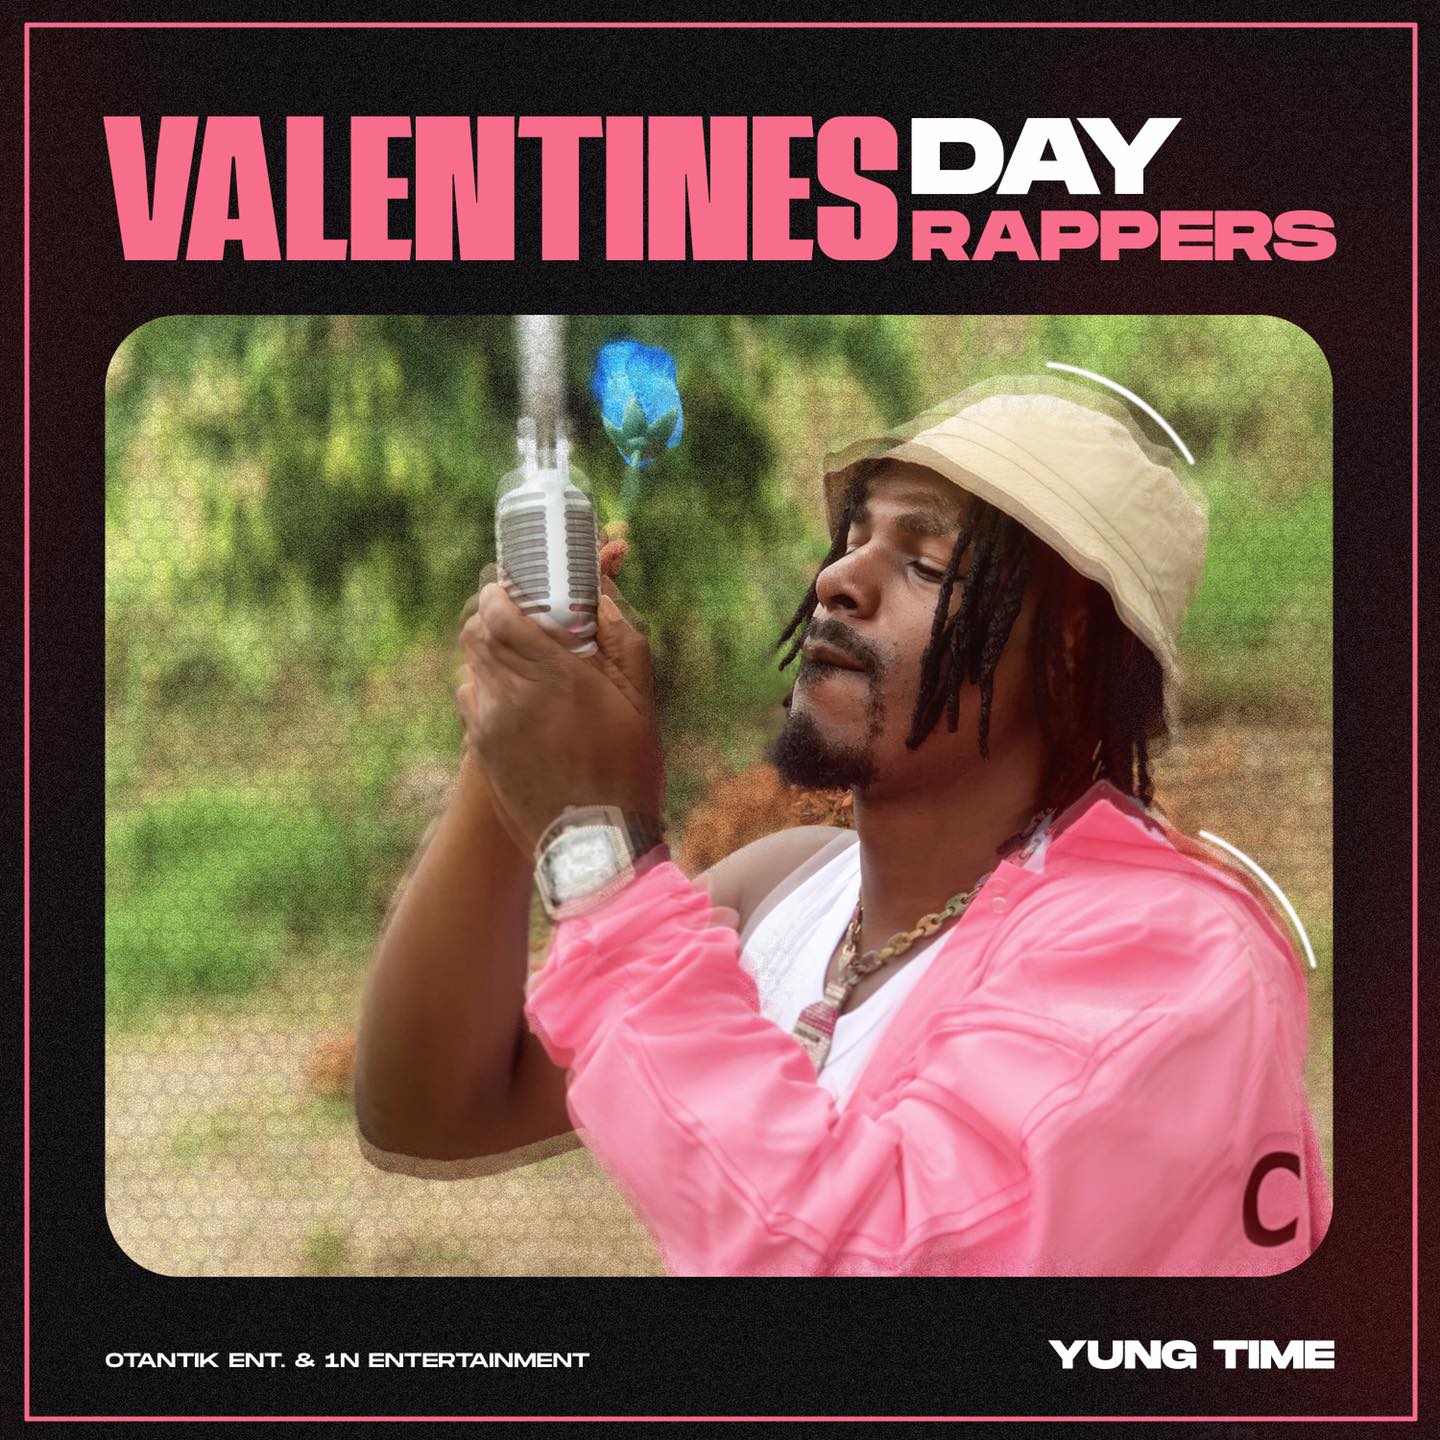 Yung Time - "Valentines Day Rappers"